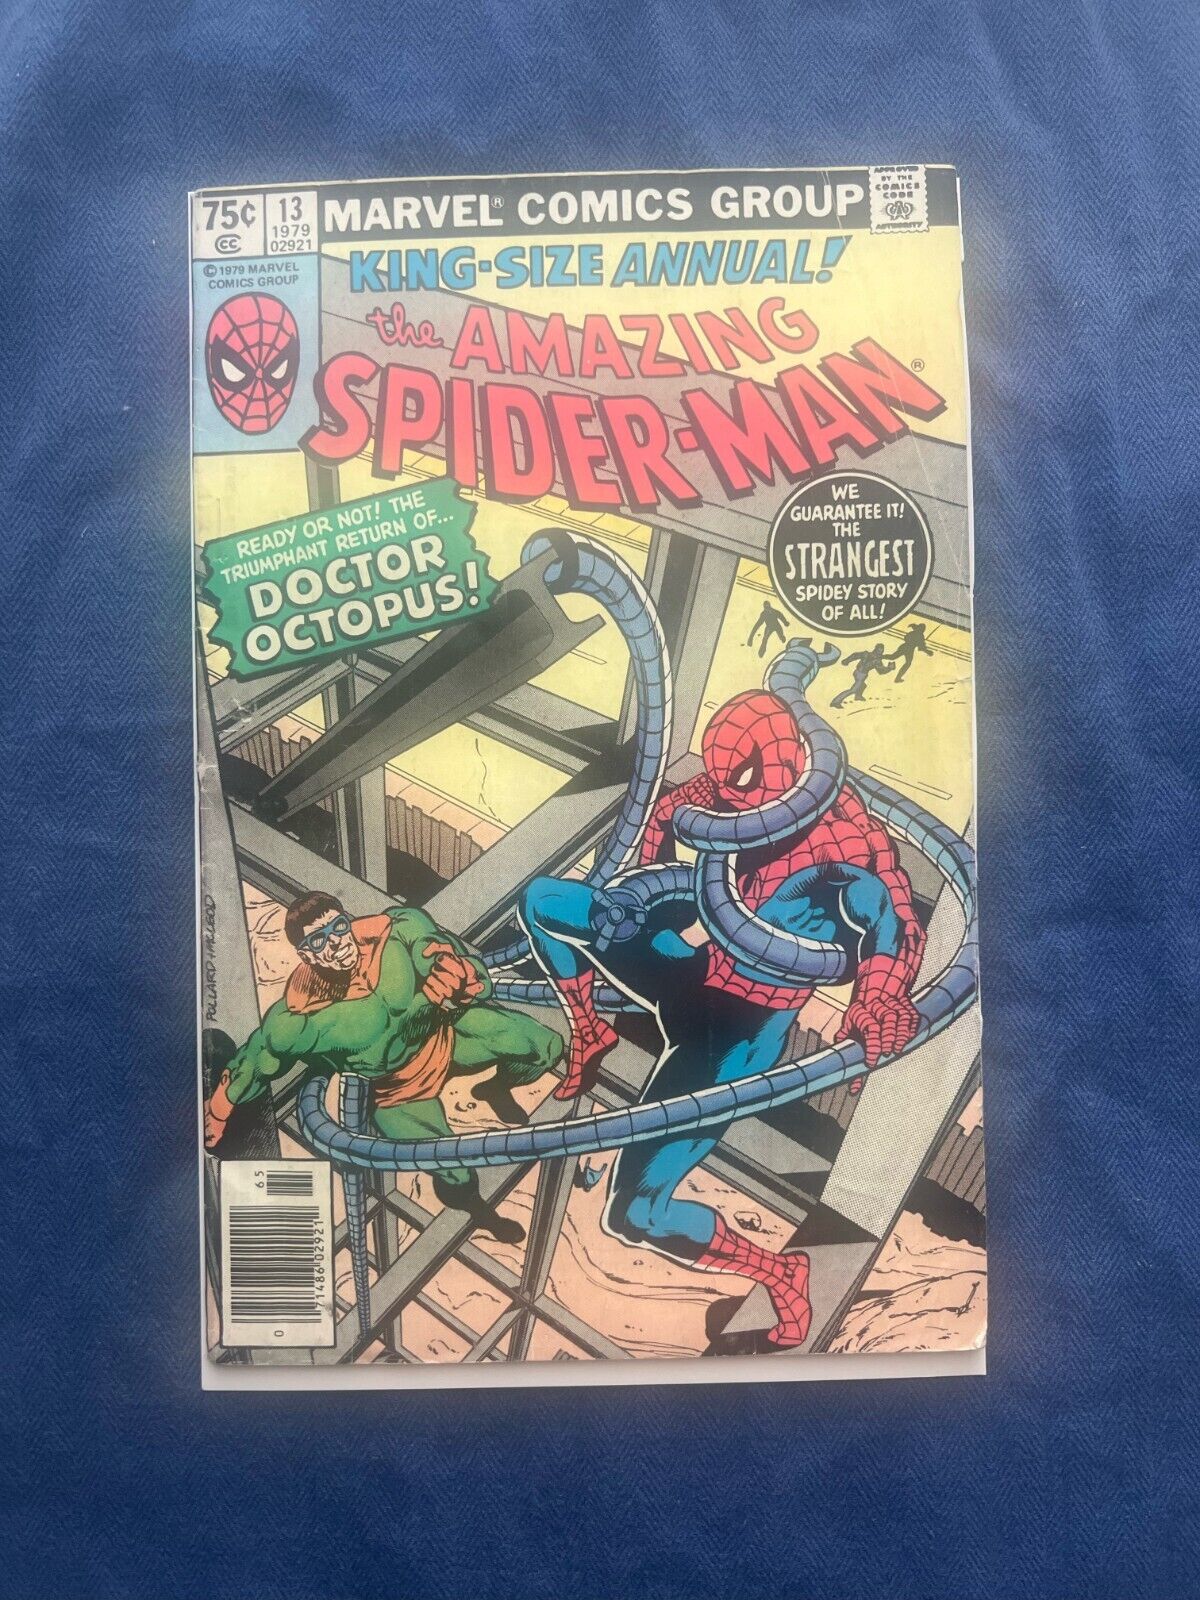 Amazing Spider-Man #13 King-Size Annual Doctor Octopus Marvel 1979